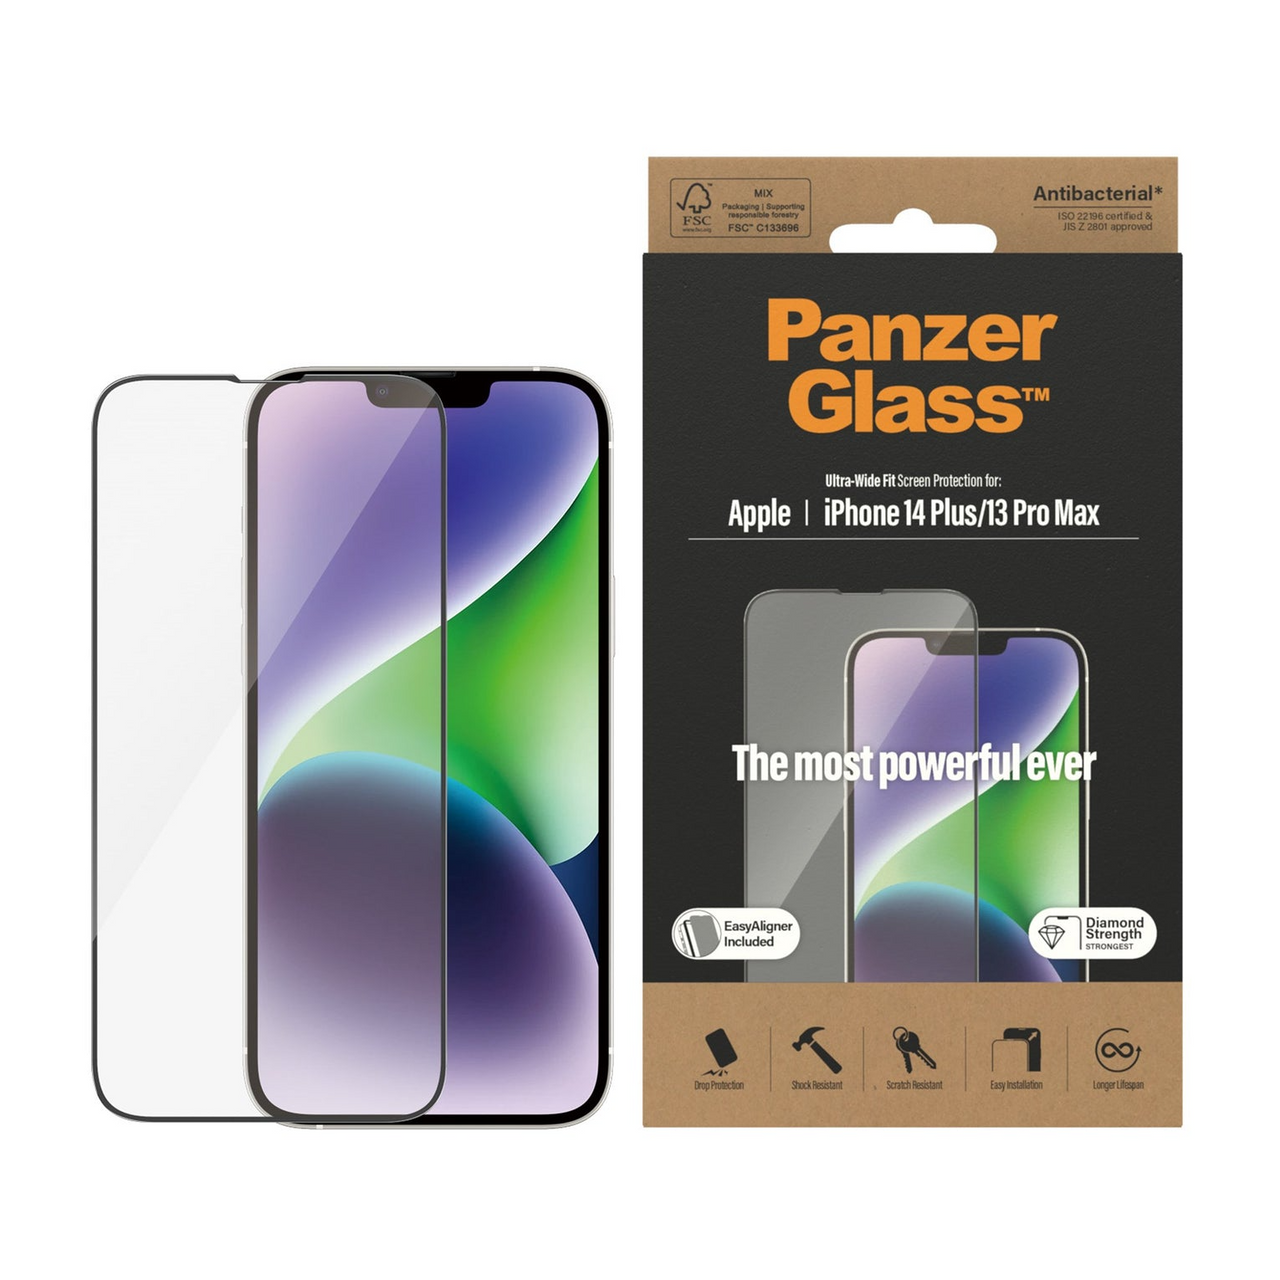 PanzerGlass Screen Protector Apple iPhone 14 Plus 13 Pro Max Ultra-Wide Fit w. EasyAligner